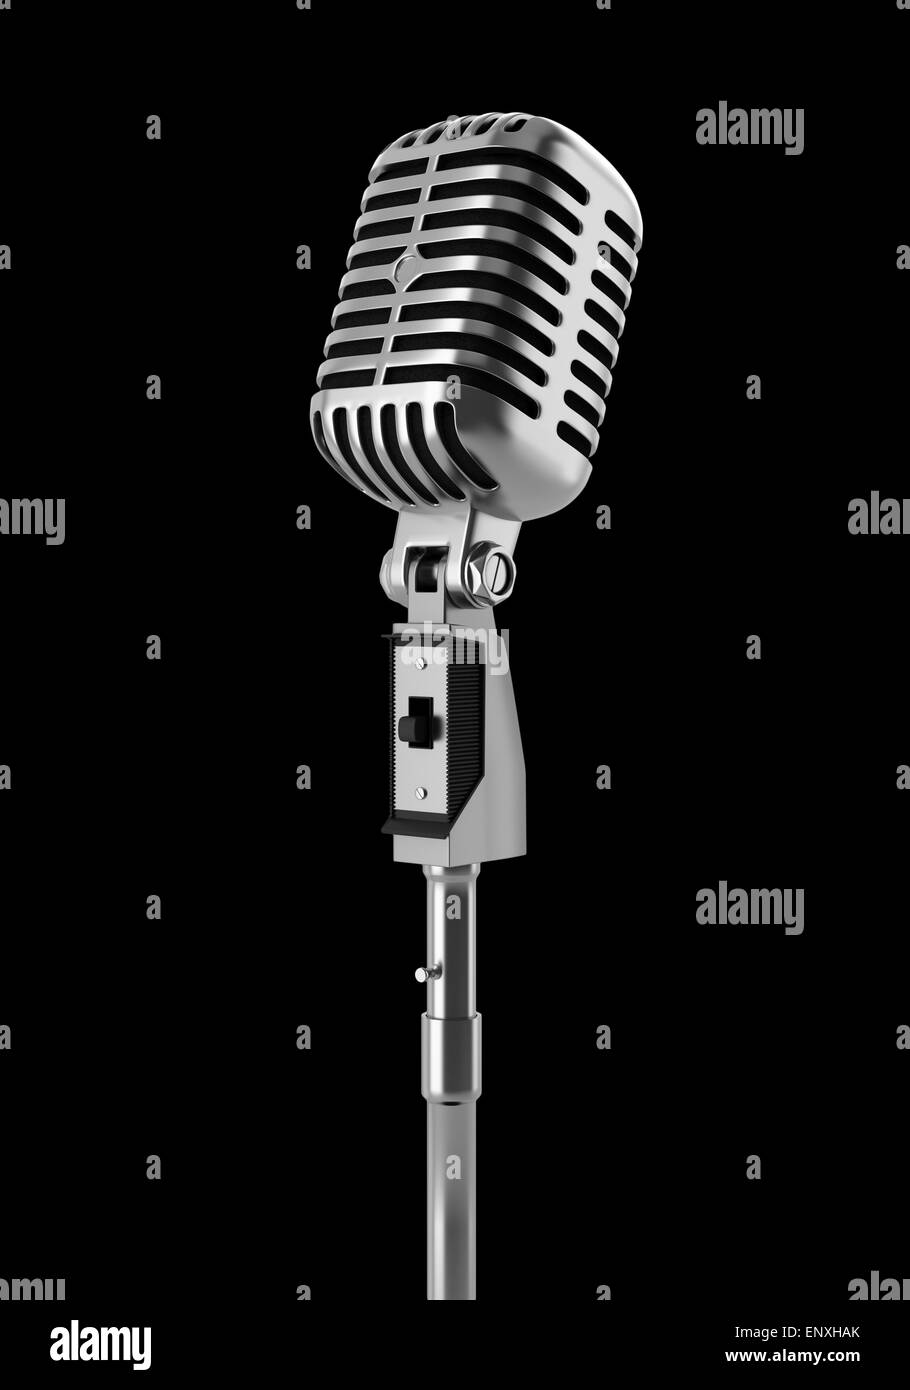 Vintage microphone Black and White Stock Photos & Images - Alamy